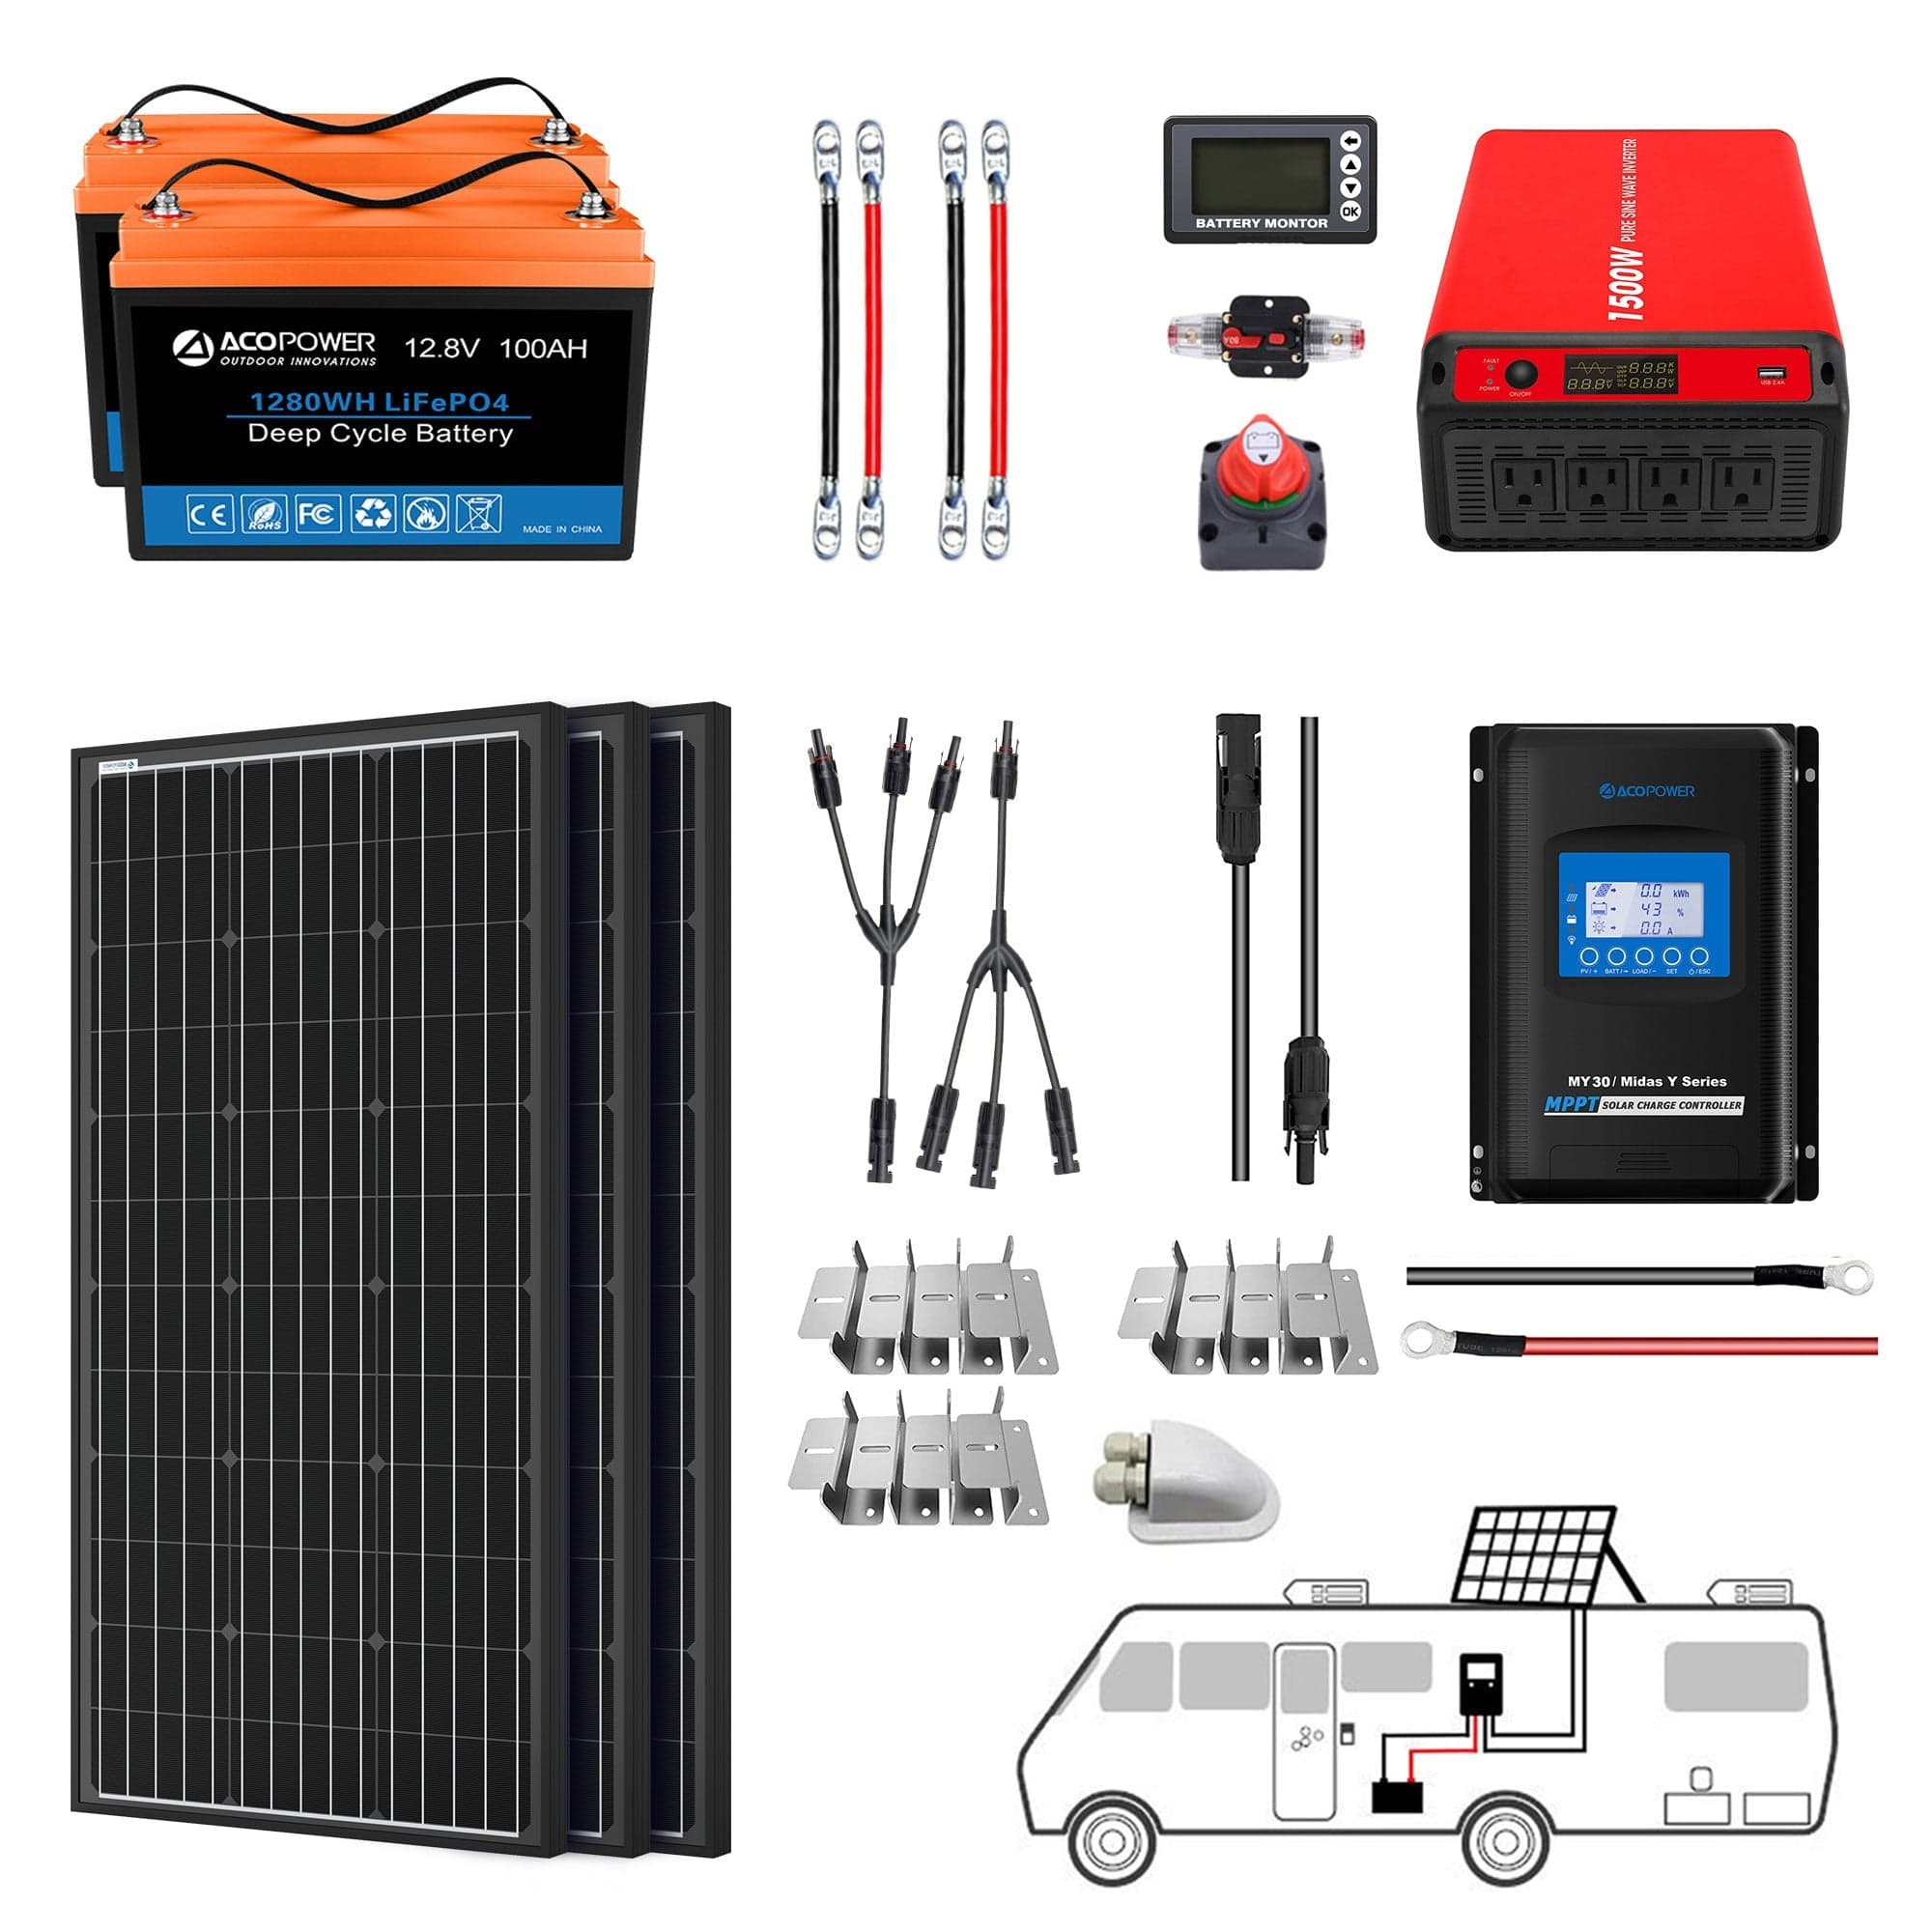 Lithium Battery Mono Solar Power Complete System with Battery and Inverter for RV Boat 12V Off Grid Kit AcoPower Solar Battery System